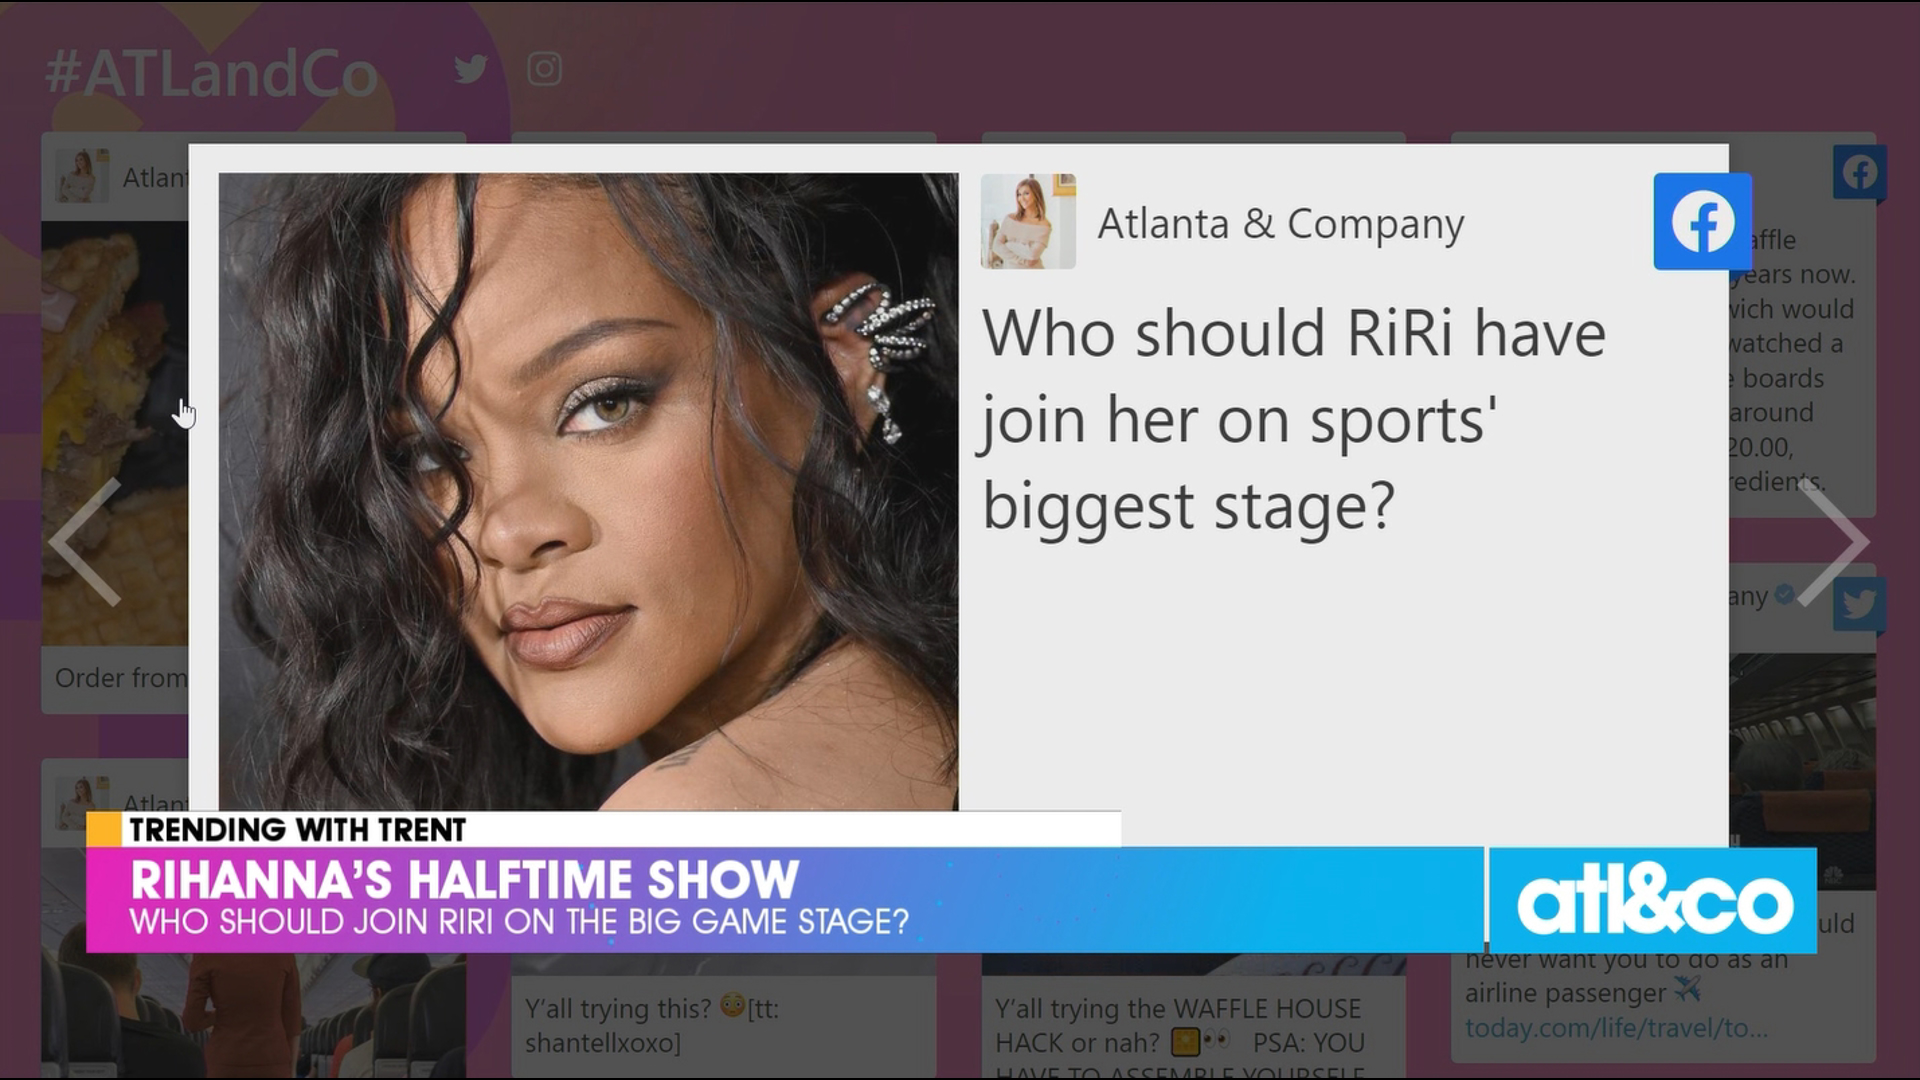 Who should join multiplatinum superstar Rihanna on the halftime show stage?